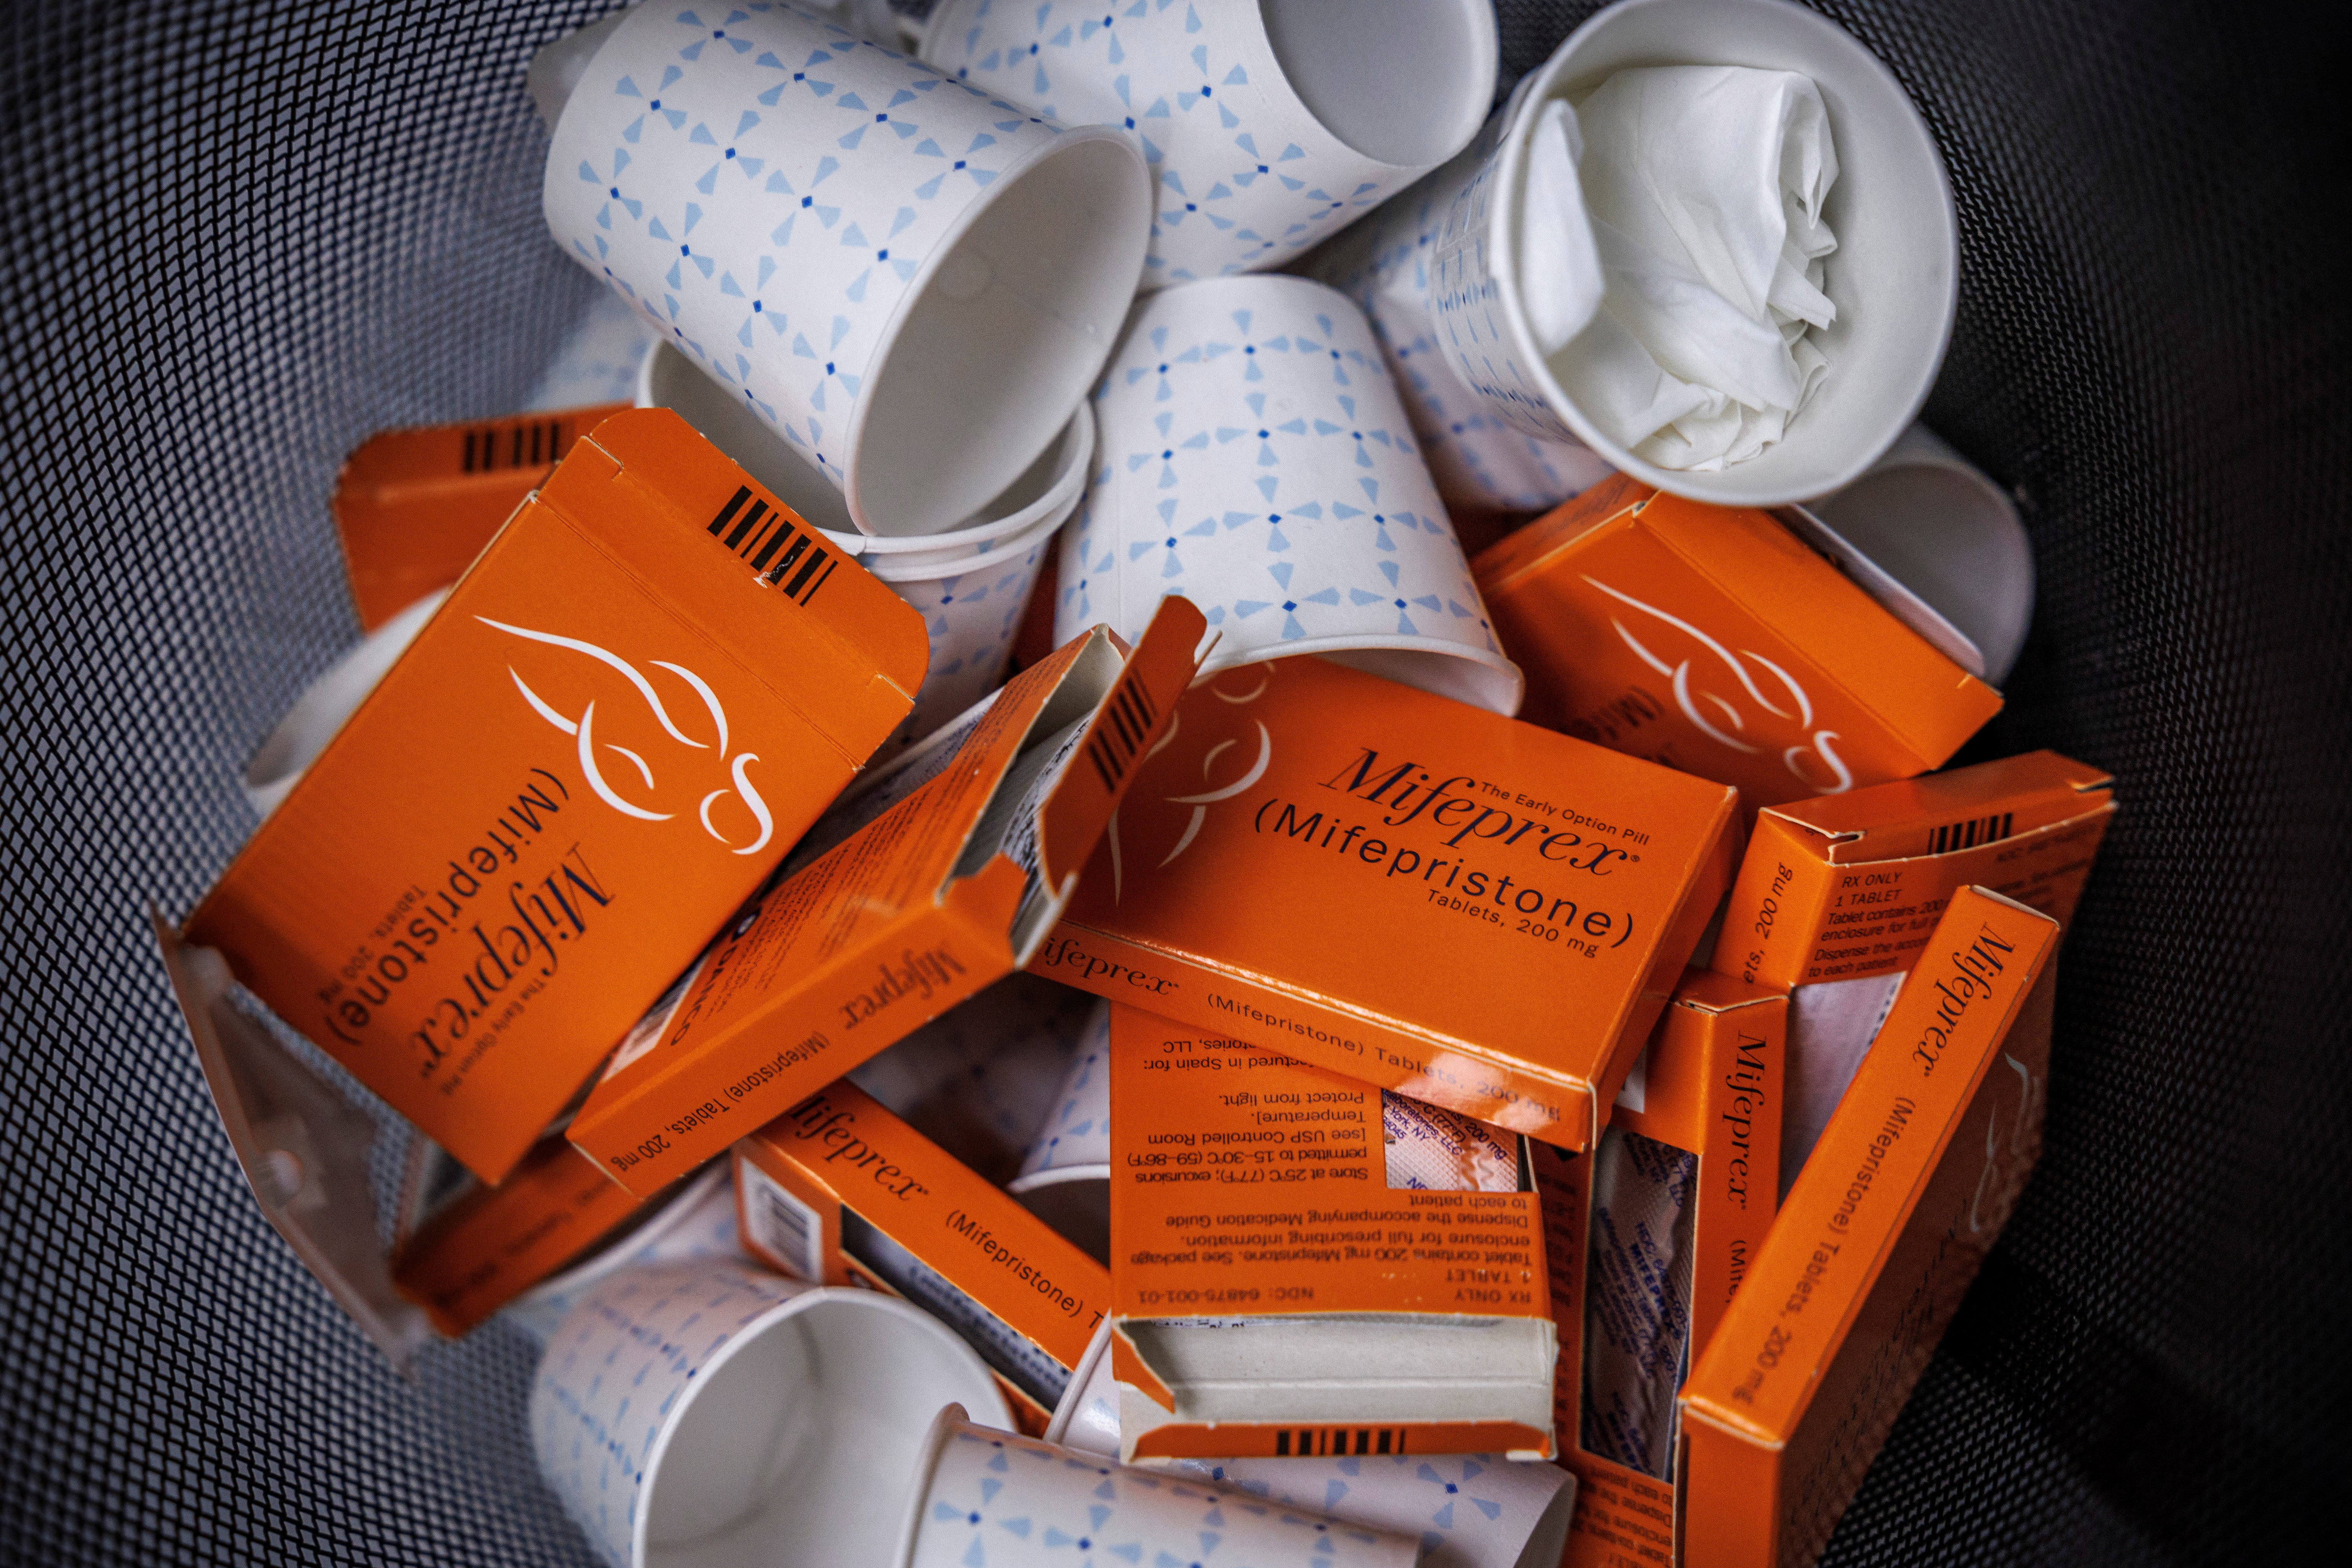 Empty boxes of Mifepristone pills, the first drug used in a medication abortion, fill a bin at Alamo Women's Clinic in Albuquerque, New Mexico